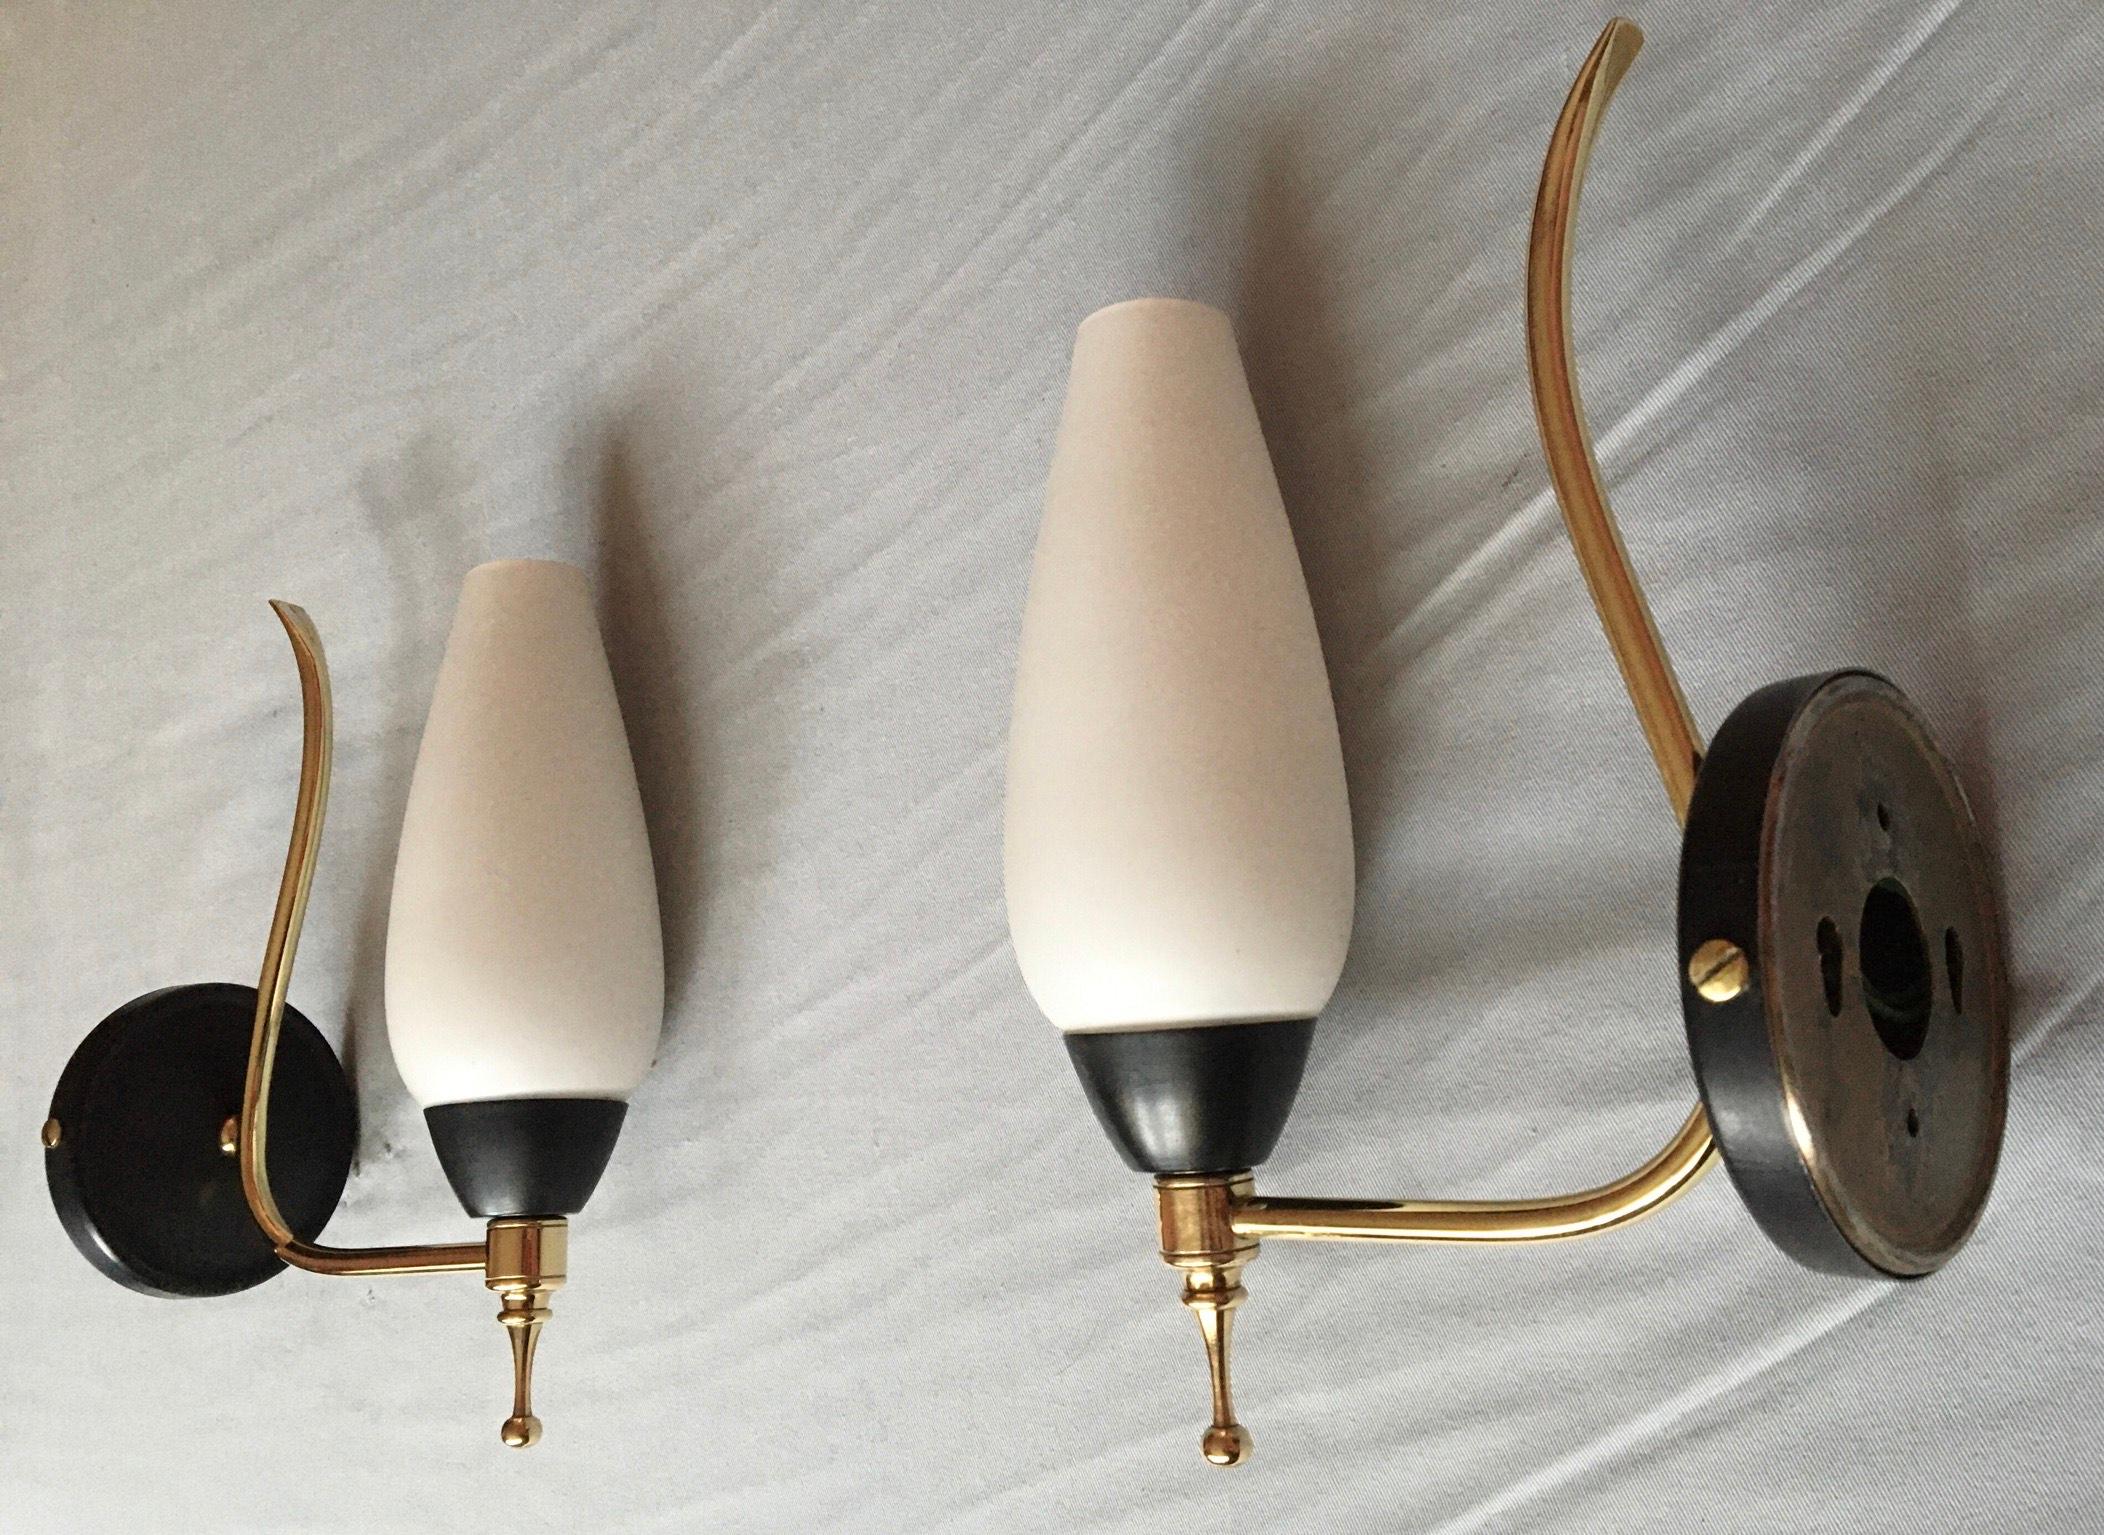 French Mid-Century Modern Style Black Gilt Brass Sconces, 1950 For Sale 7